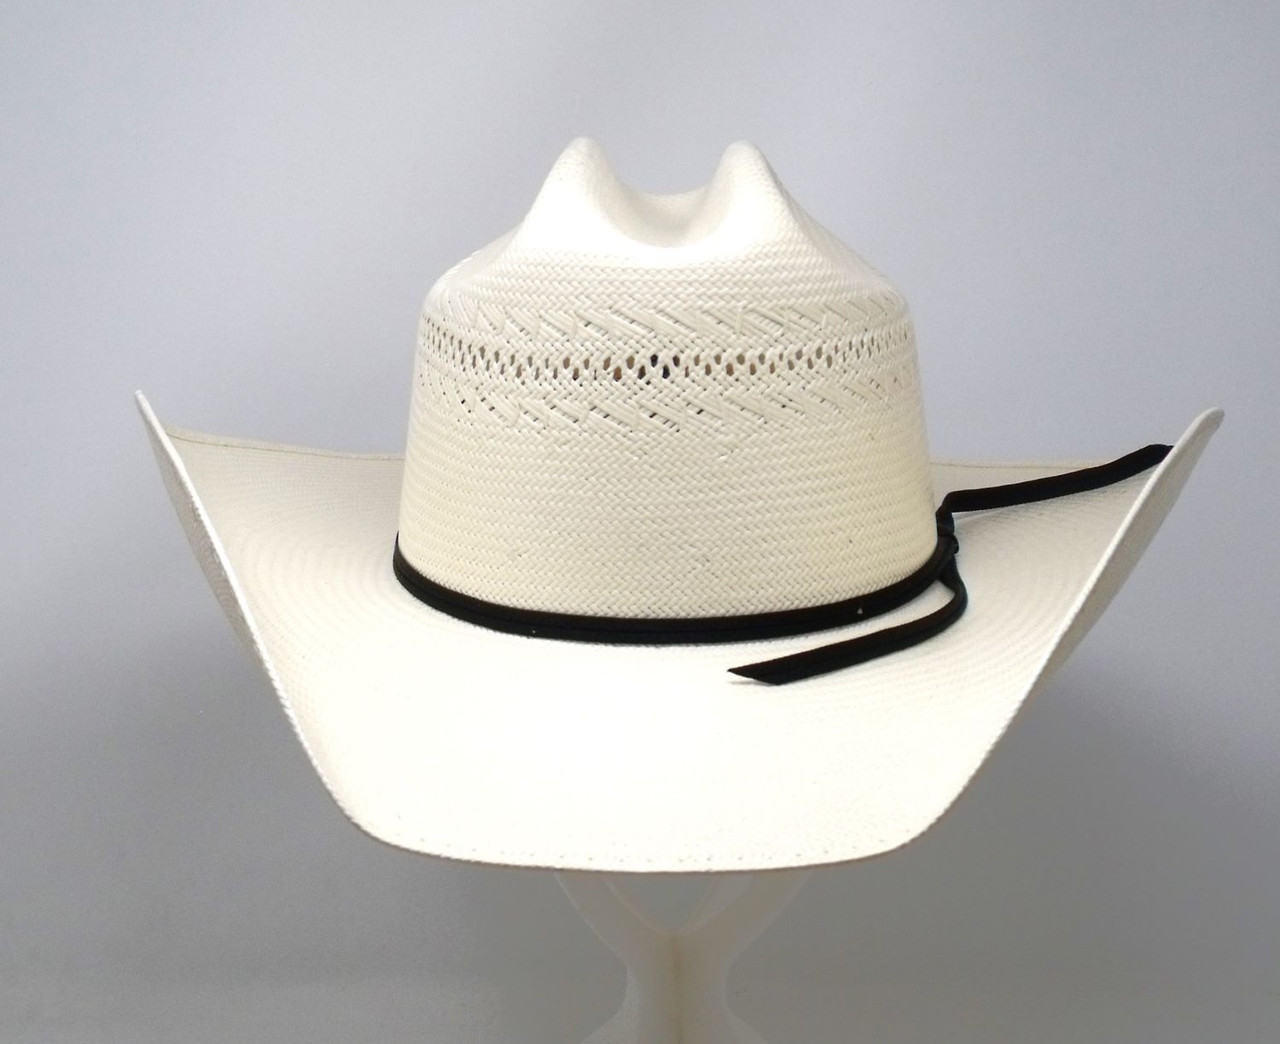 Cowboy straw hat with Lv logo – Back in the Ranch